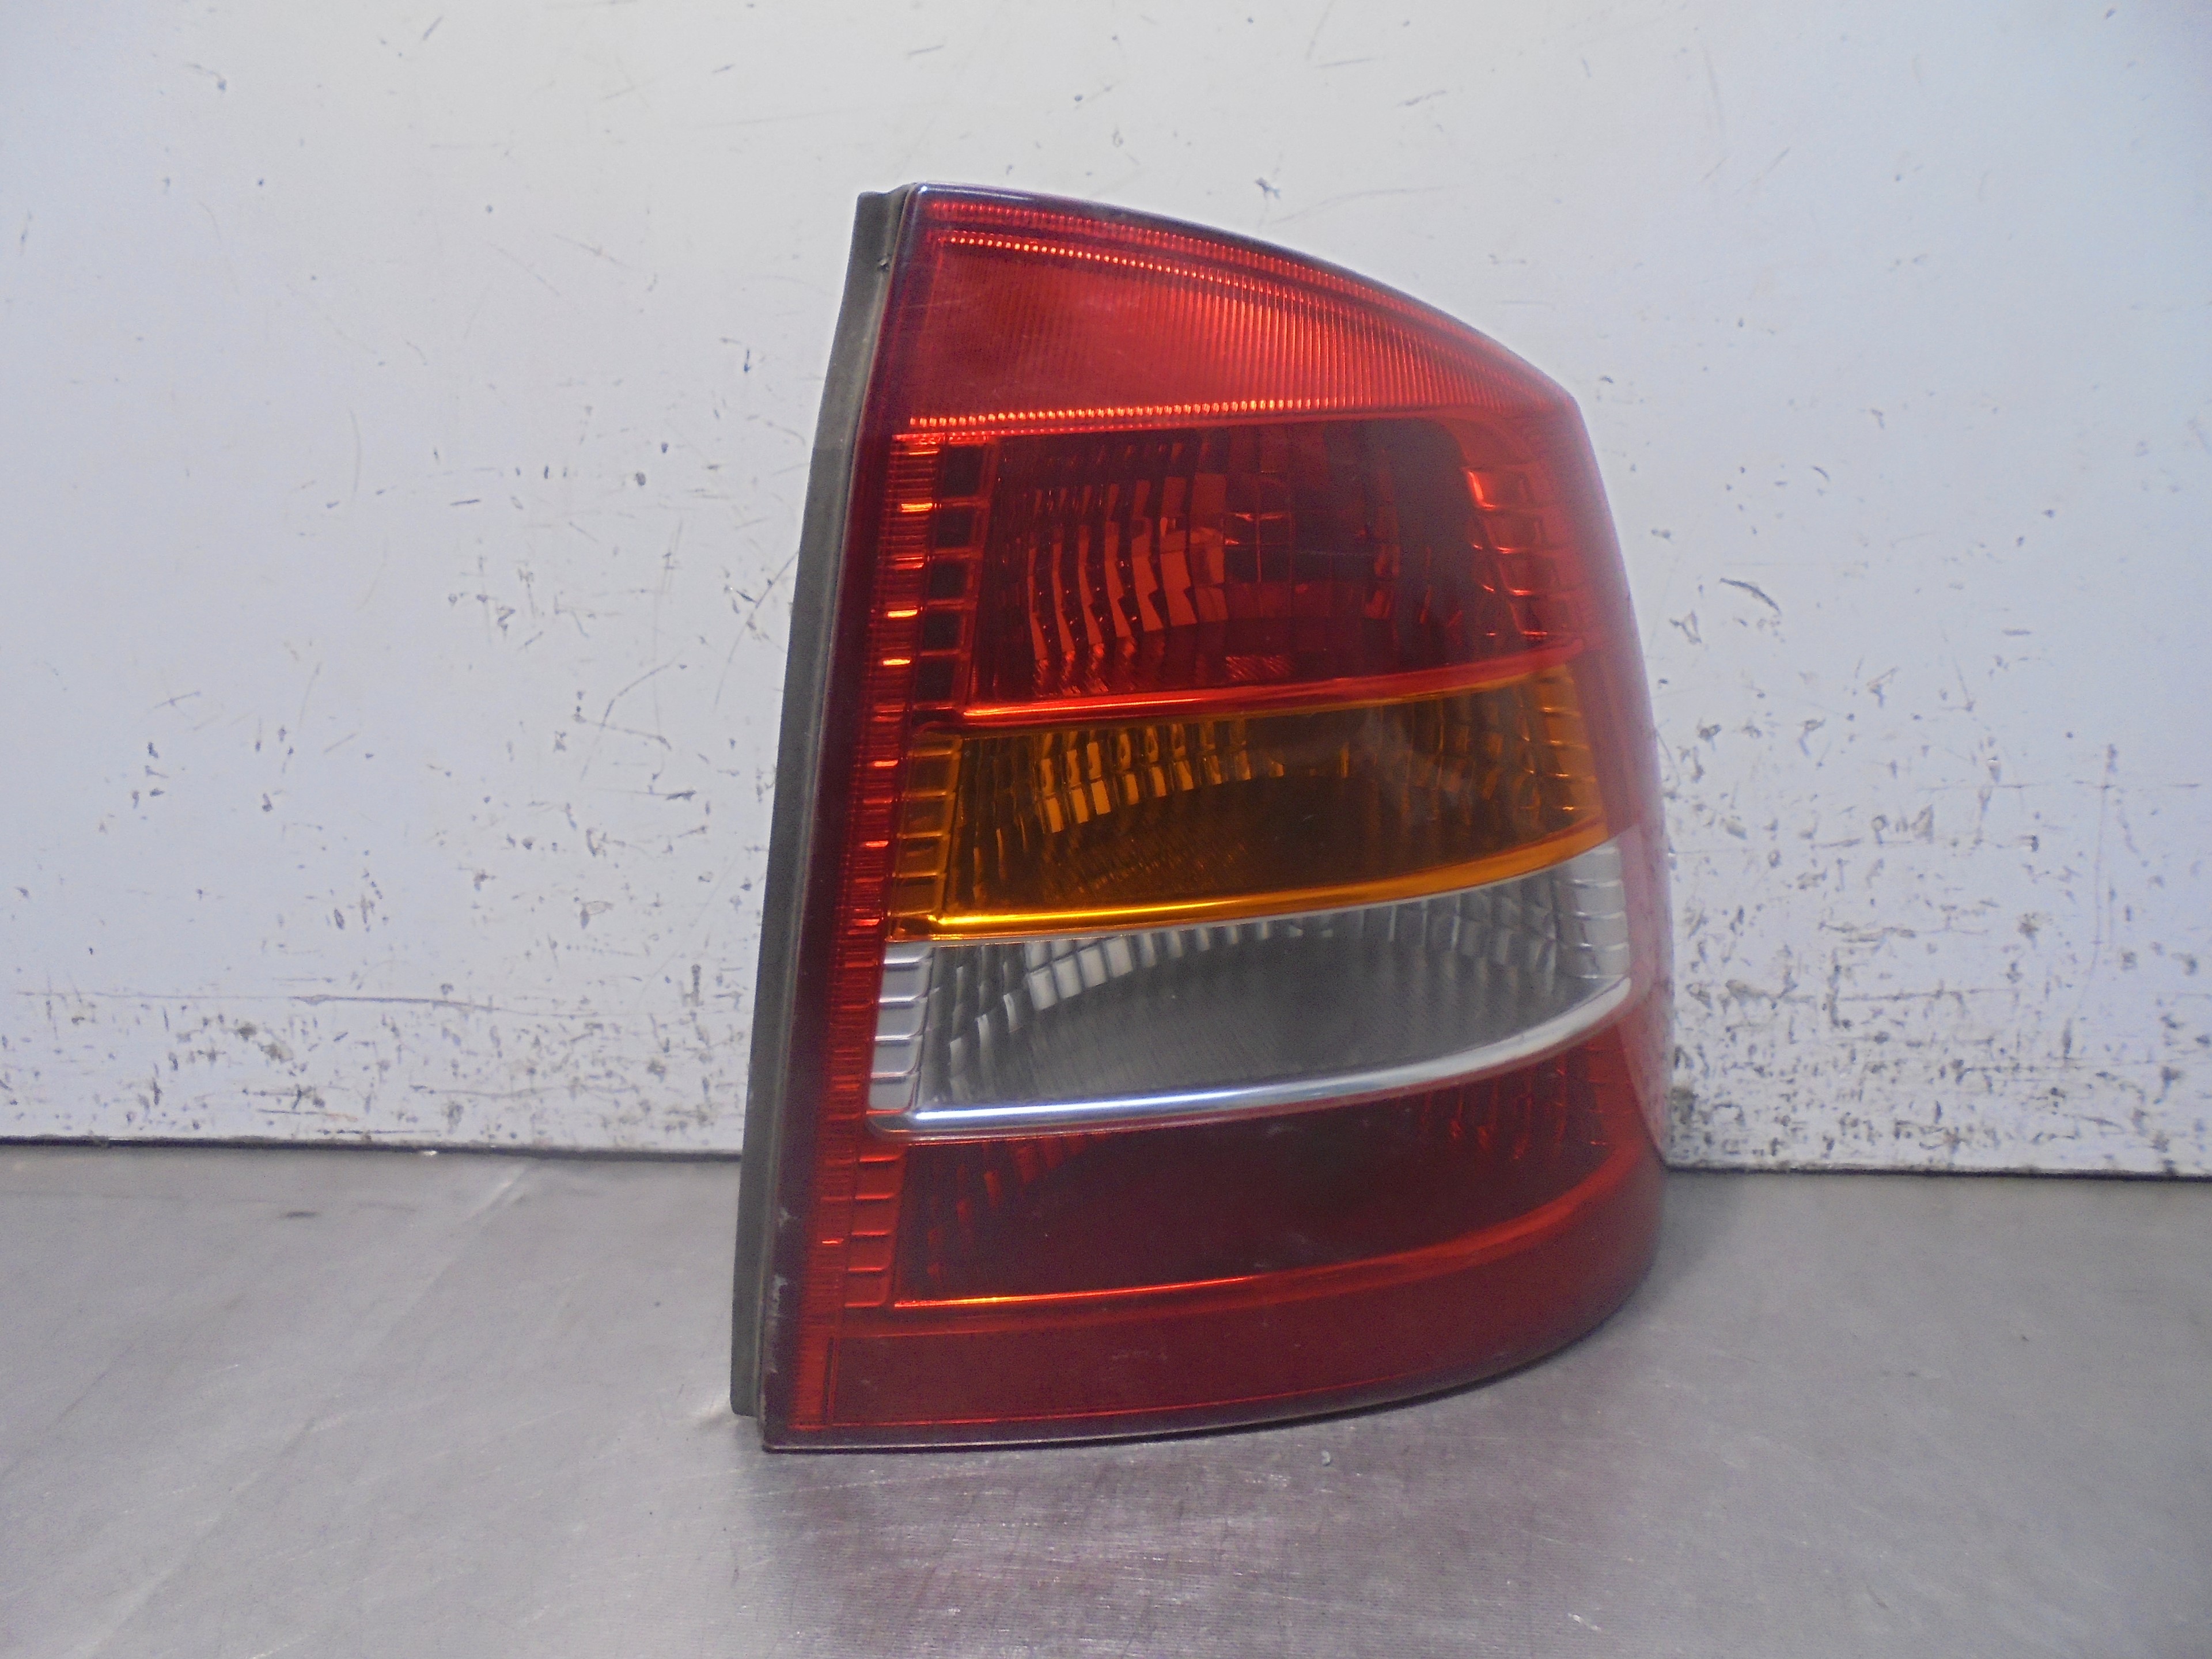 OPEL Astra H (2004-2014) Rear Right Taillight Lamp 62225 25067567